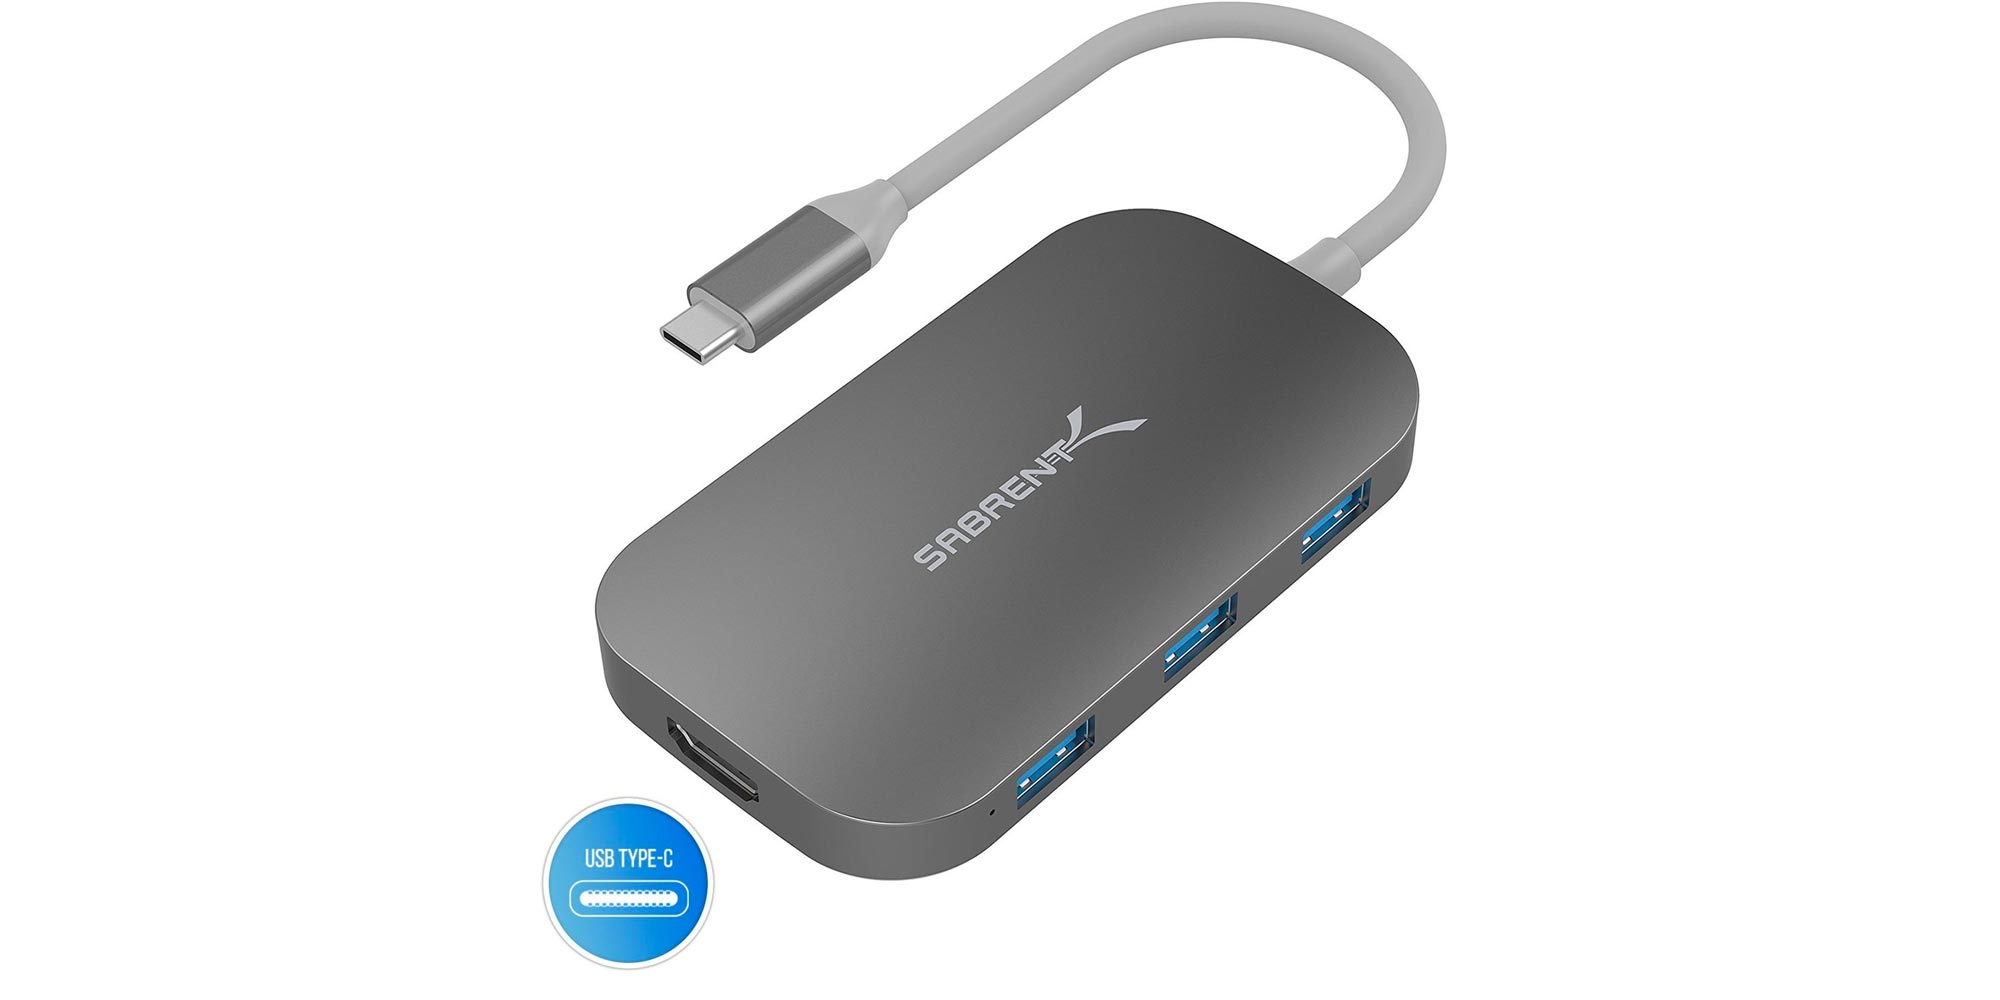 Sabrent's USB-C hub features SD card support, HDMI, more for just $25